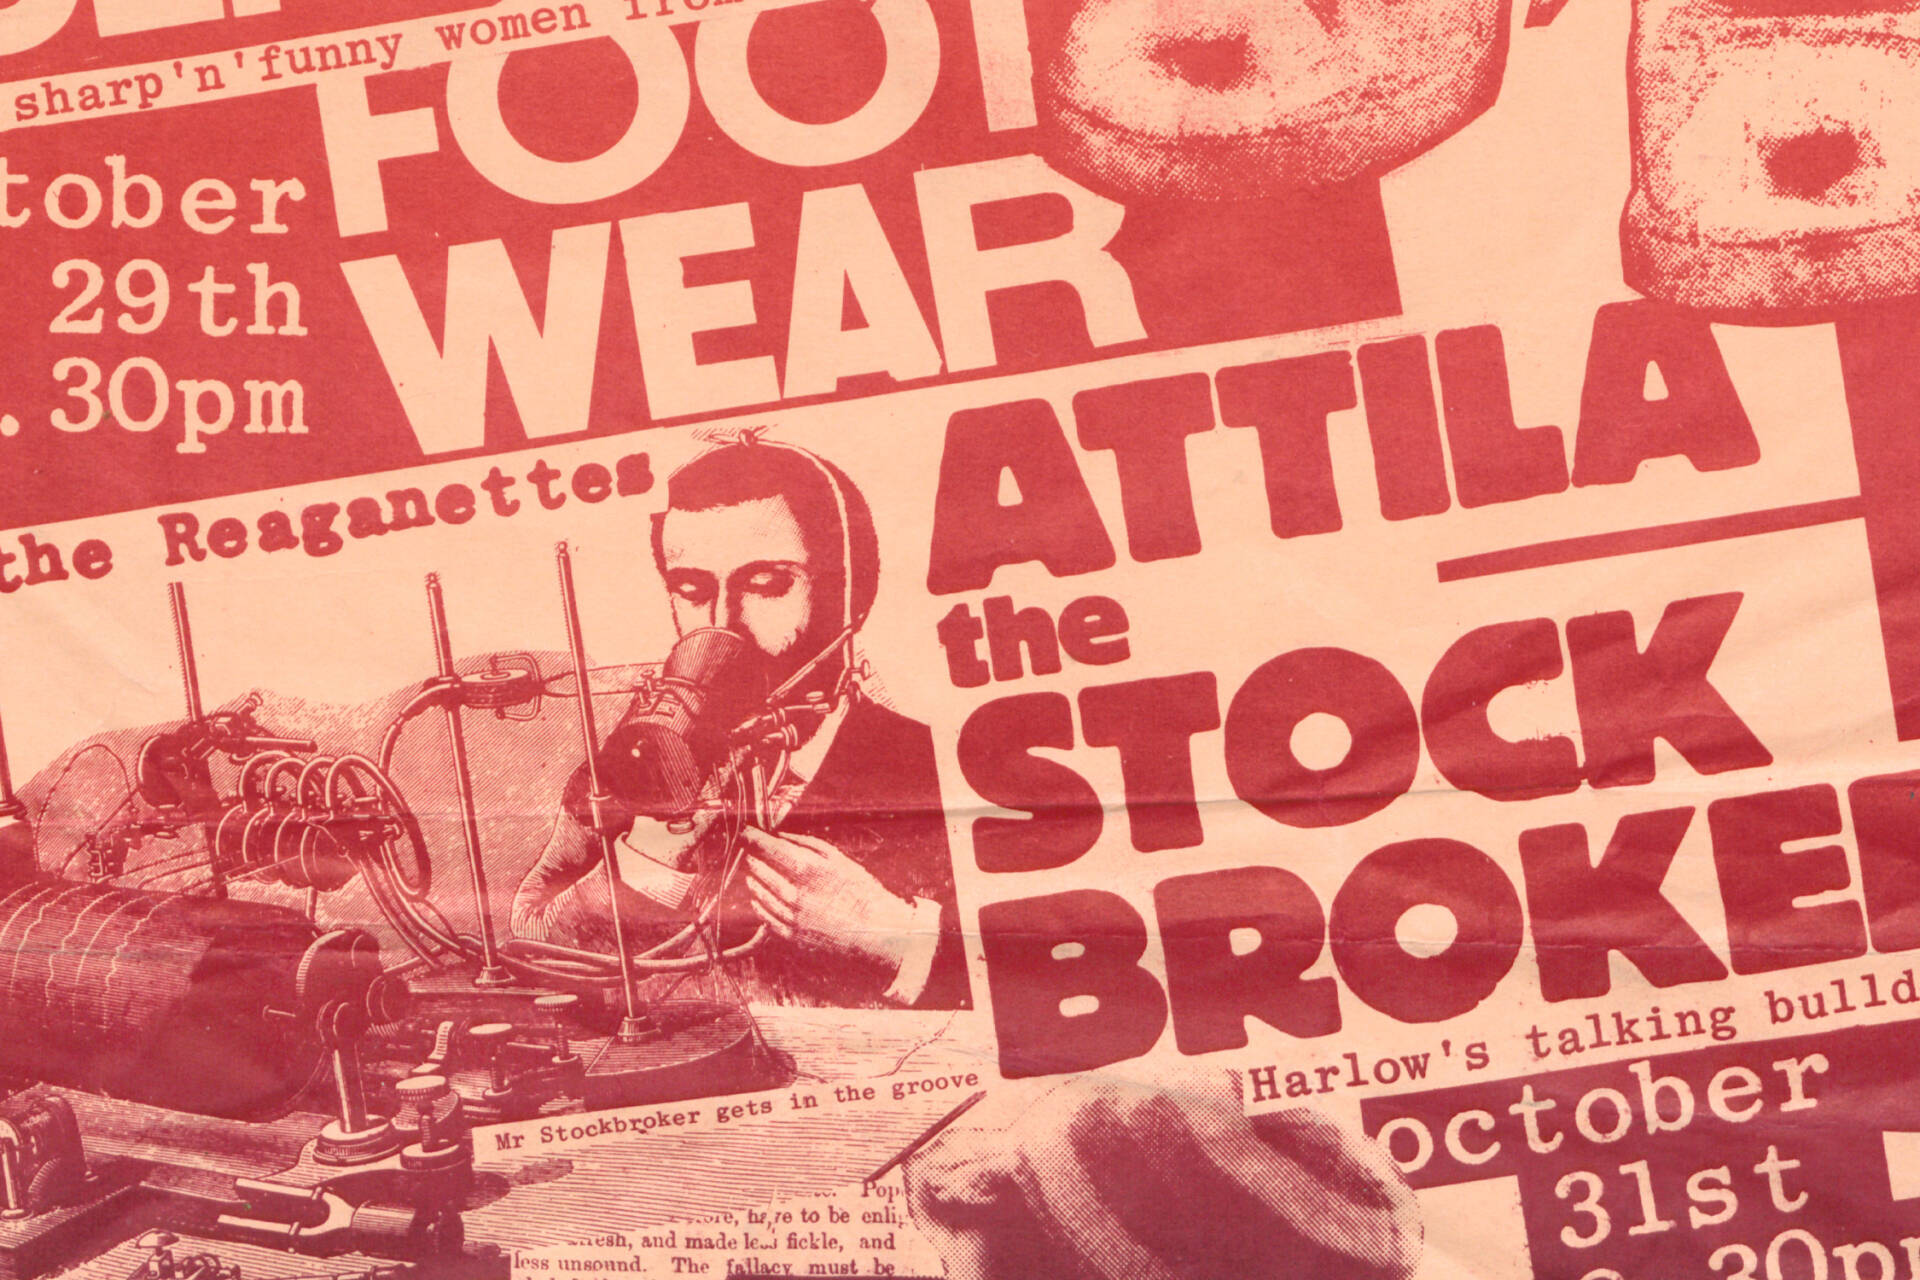 Gig poster for Attila the Stockbroker on October 31st at the Man in the Moon, Norfolk St., Cambridge.